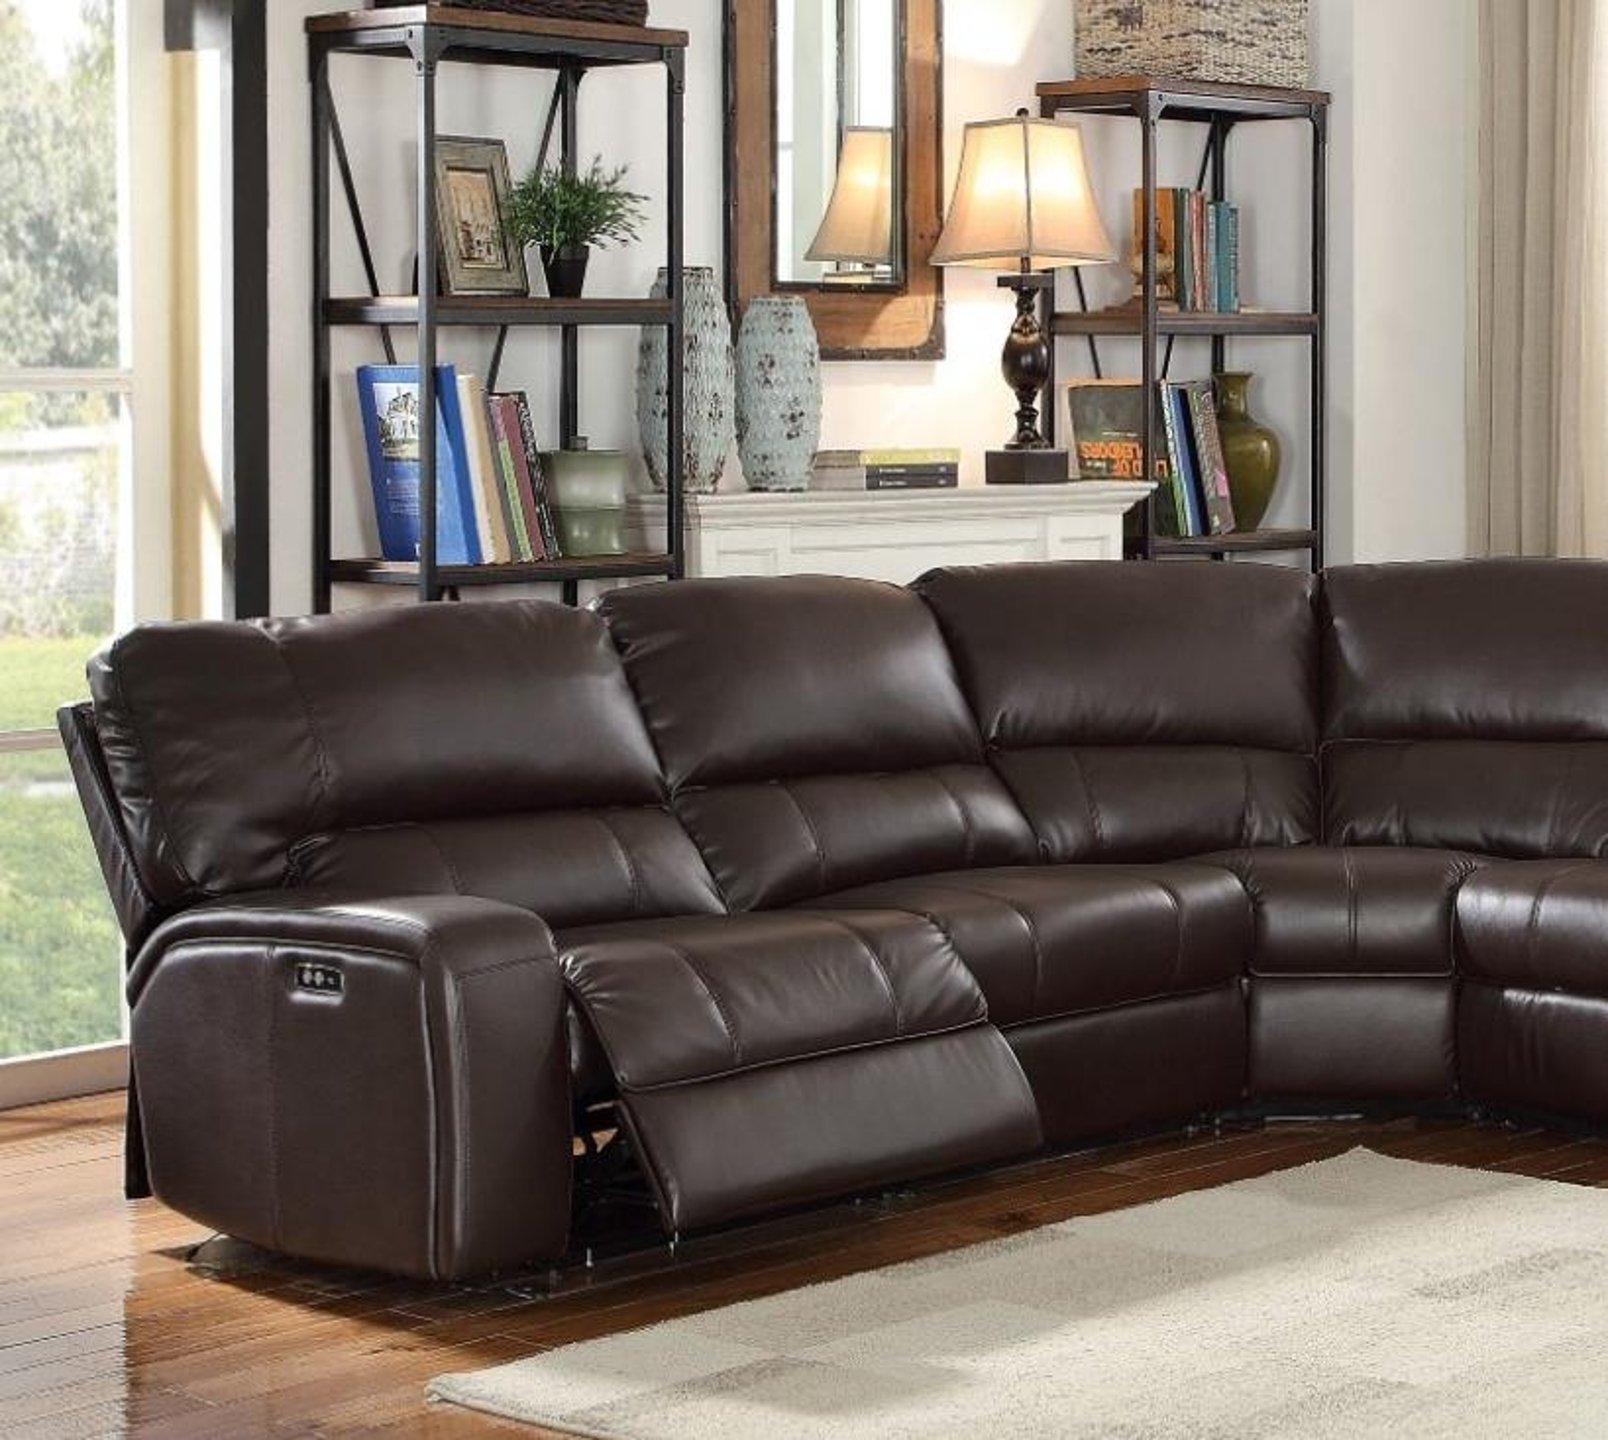 Buy ACME Saul 54155 Reclining Sectional in Espresso, Leather online